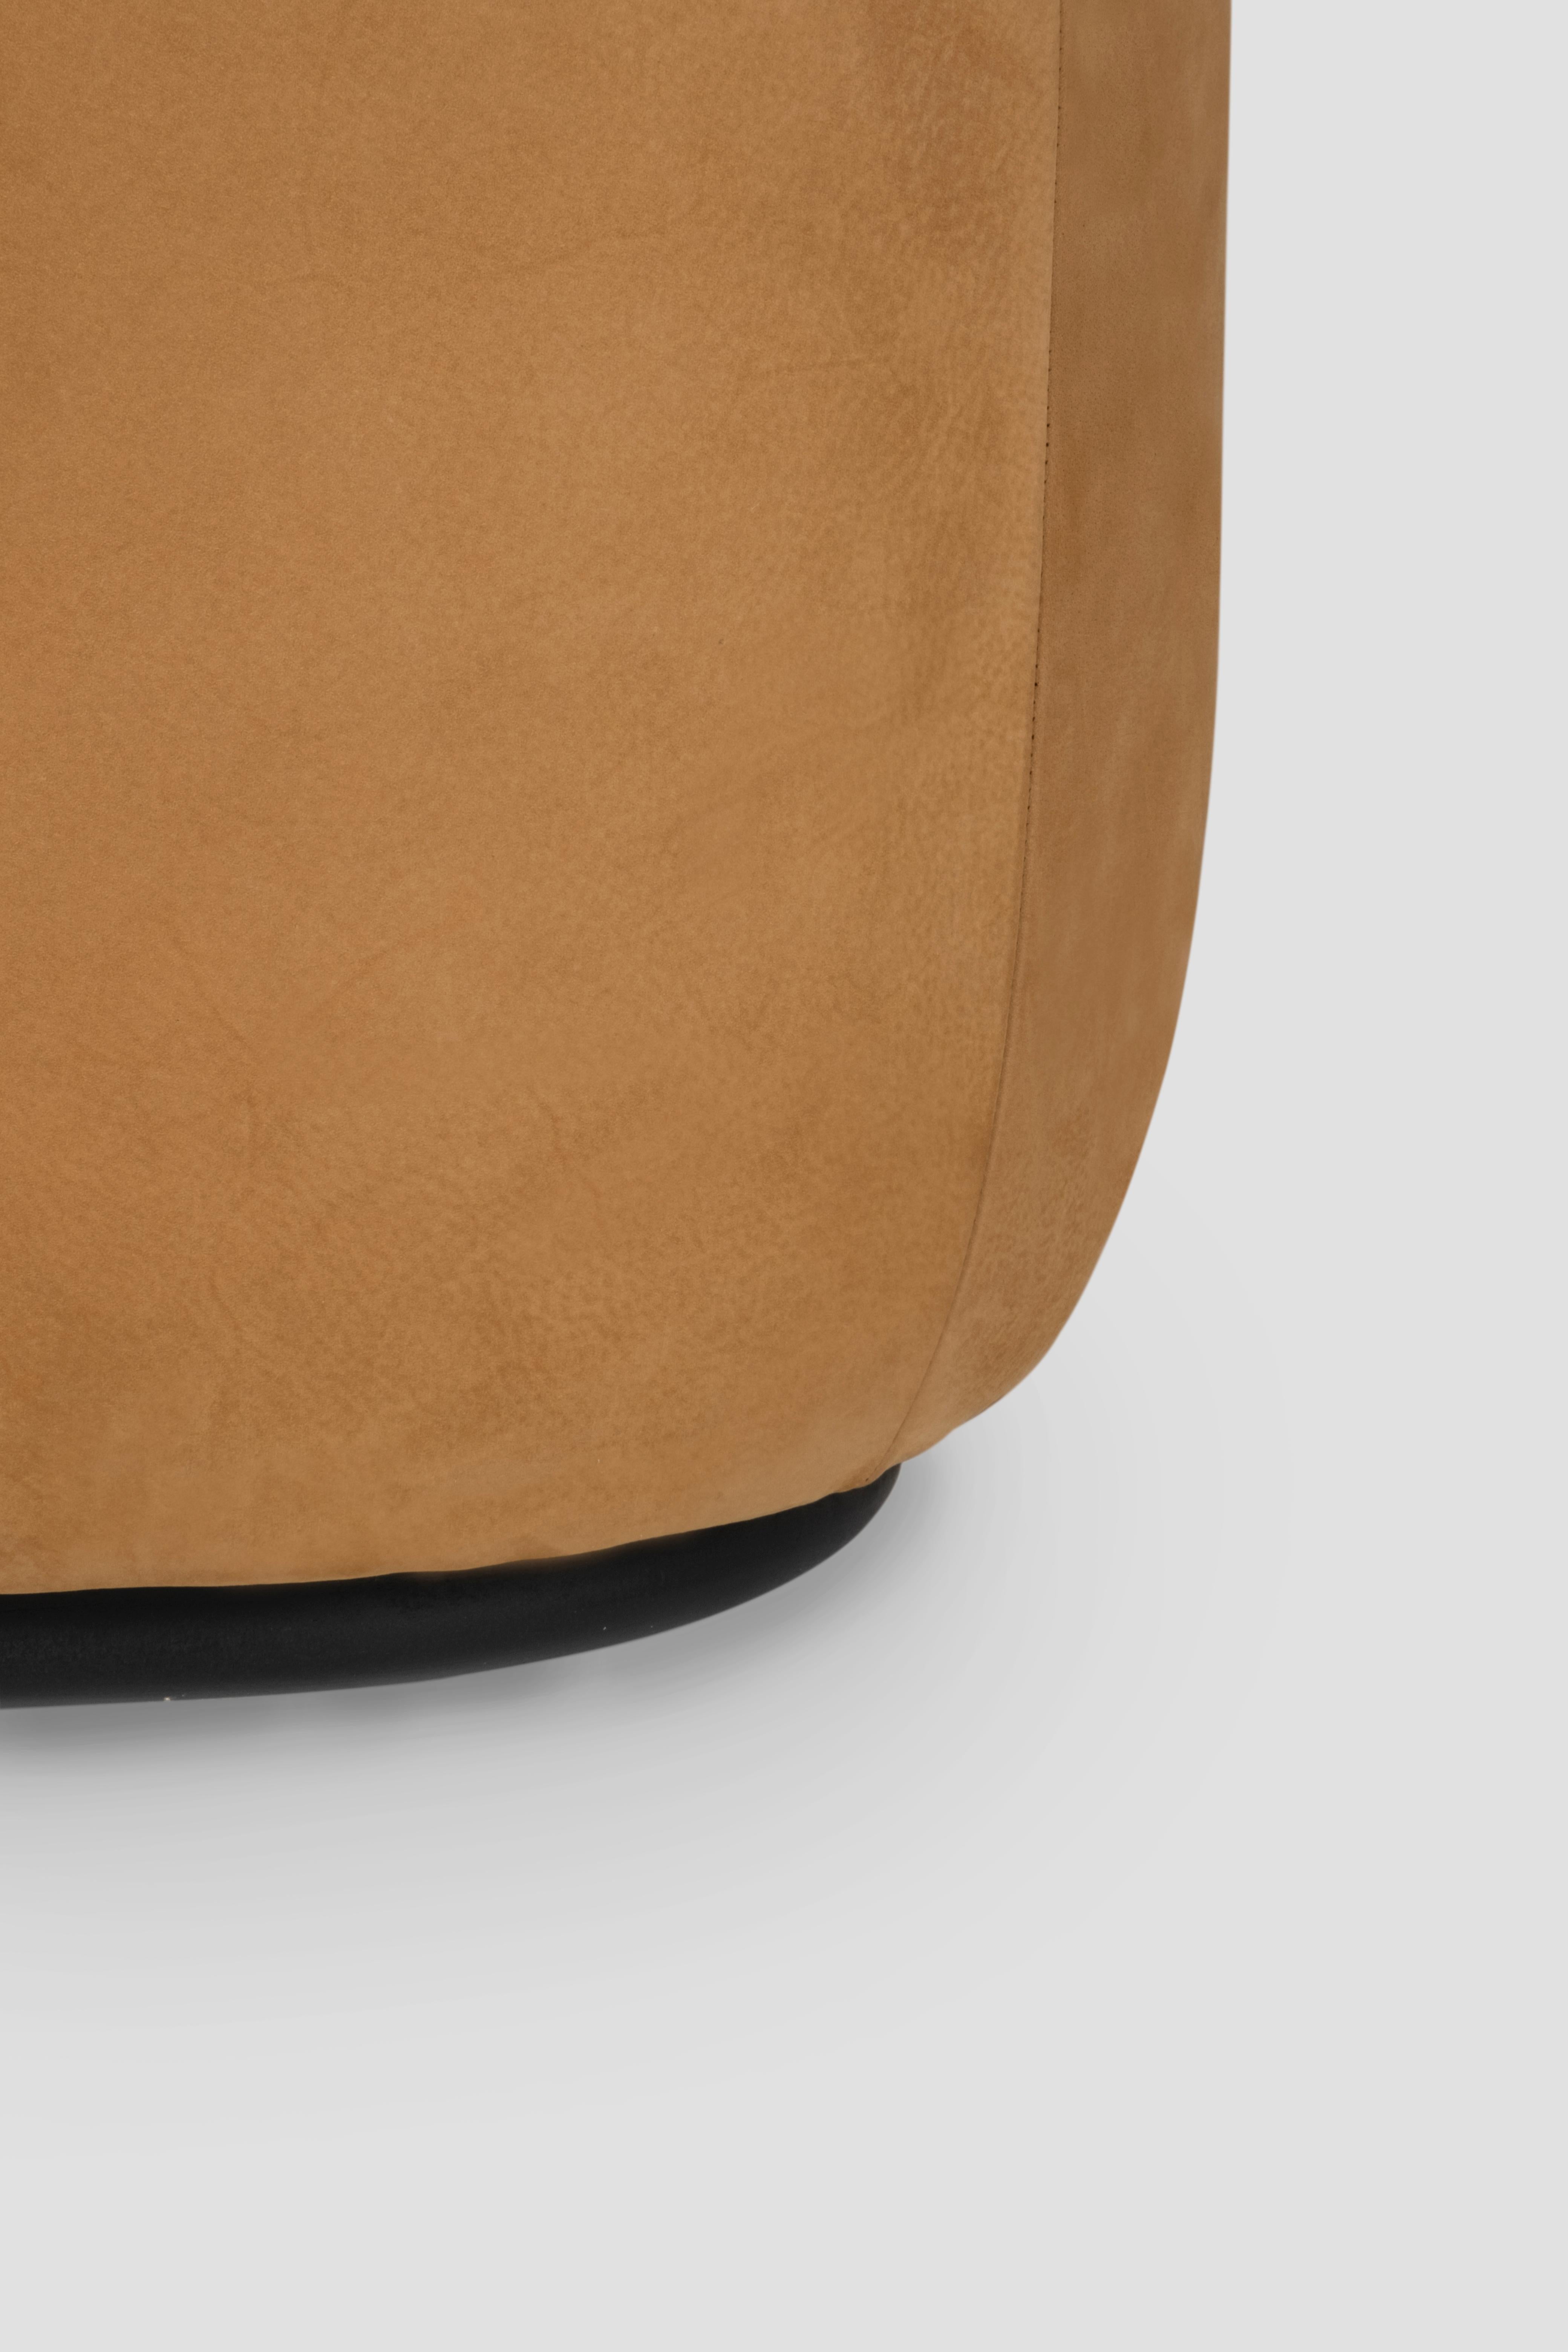 Modern Capri Pouf Ottoman Caramel Nubuck Leather Handmade Portugal by Greenapple In New Condition For Sale In Lisboa, PT